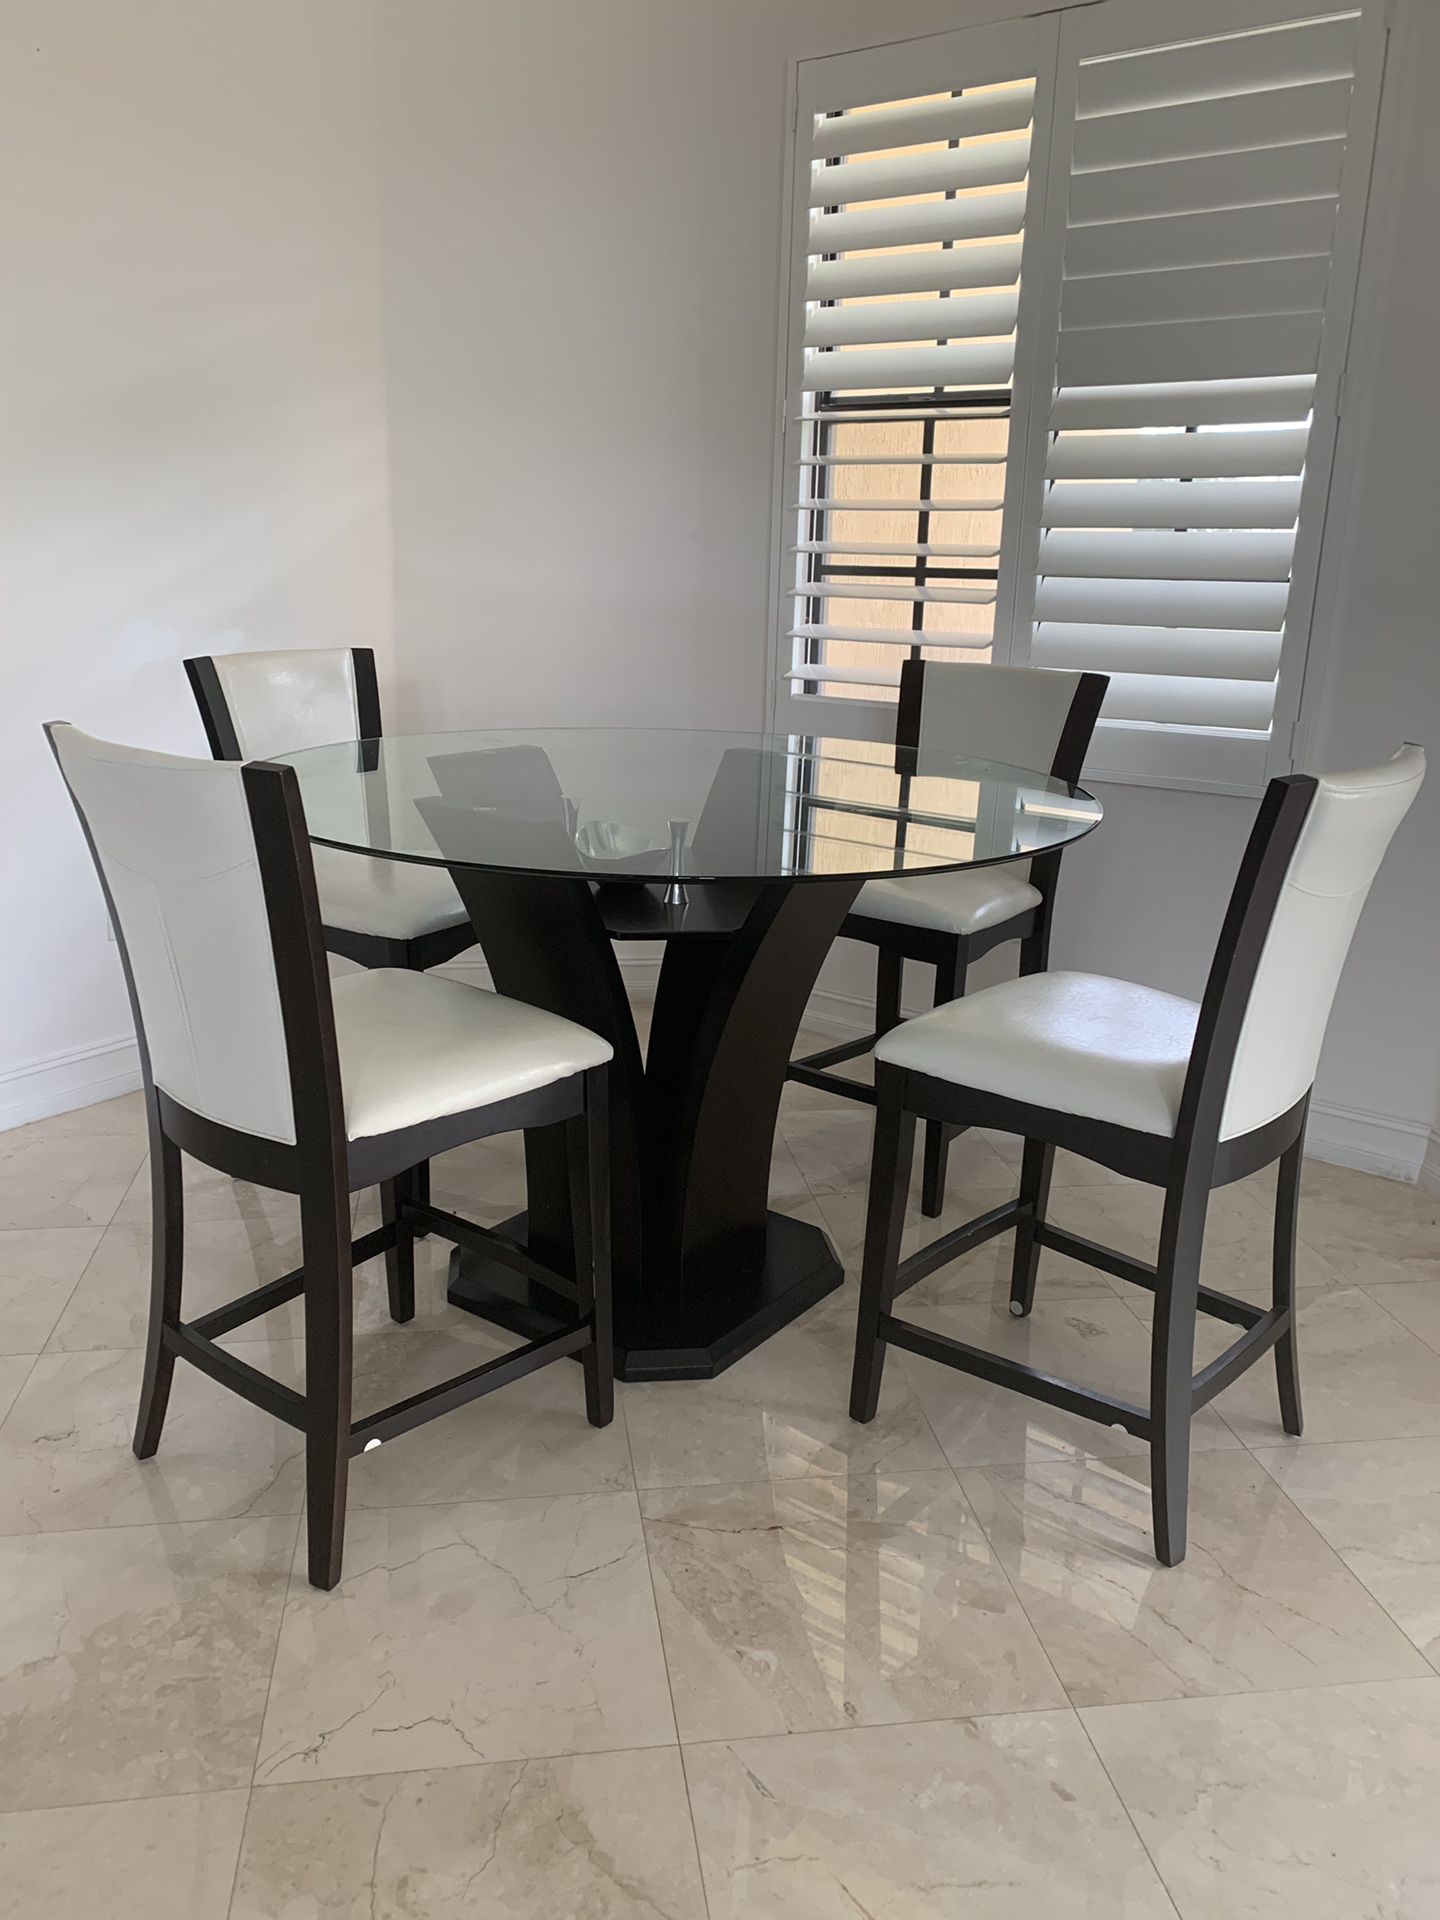 Round breakfast table with six chairs